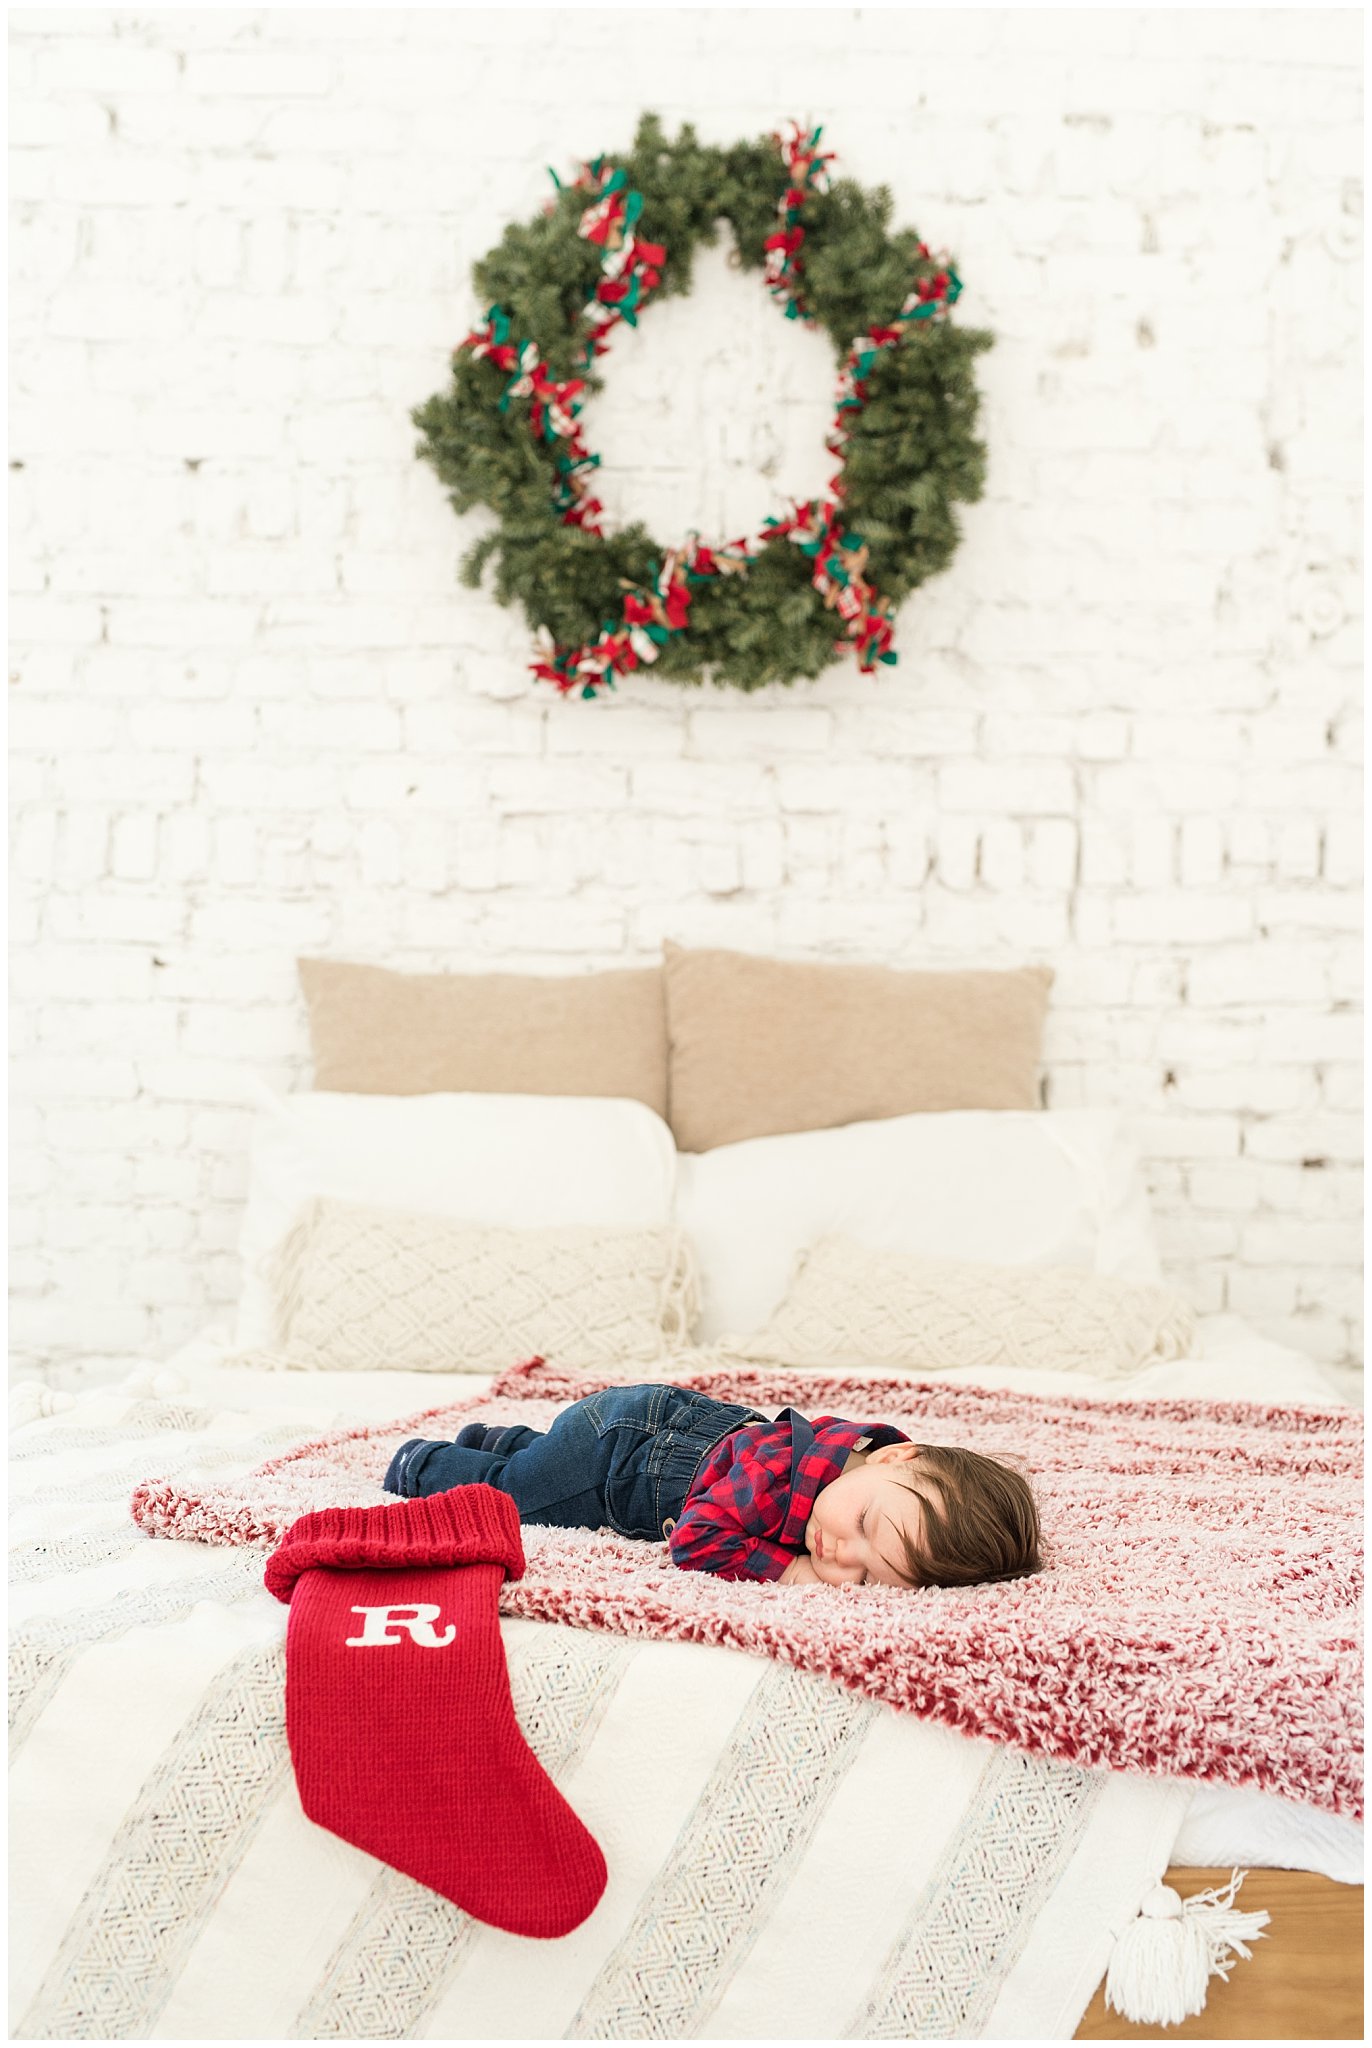 Sleeping 6 month old baby boy on bed with Christmas stocking and wreath | Family Christmas session at the 5th floor | Utah Photographers | Jessie and Dallin Photography